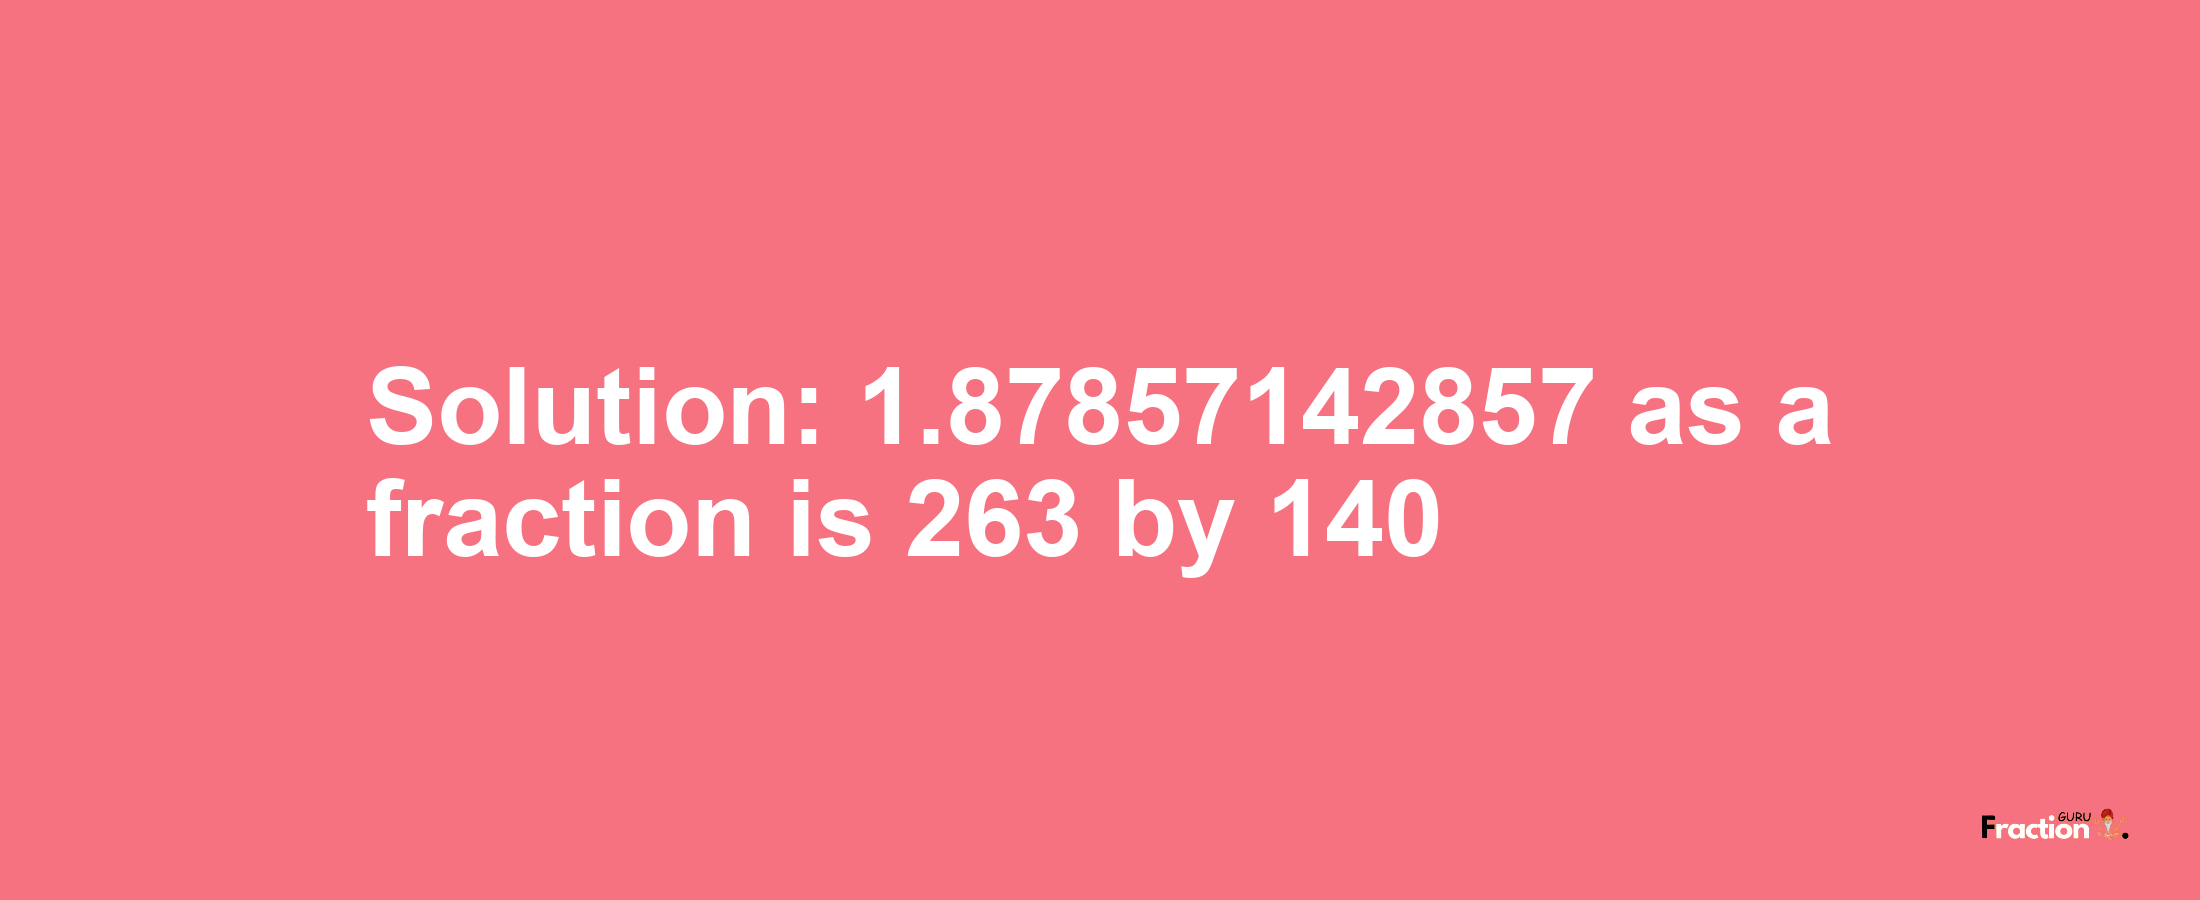 Solution:1.87857142857 as a fraction is 263/140